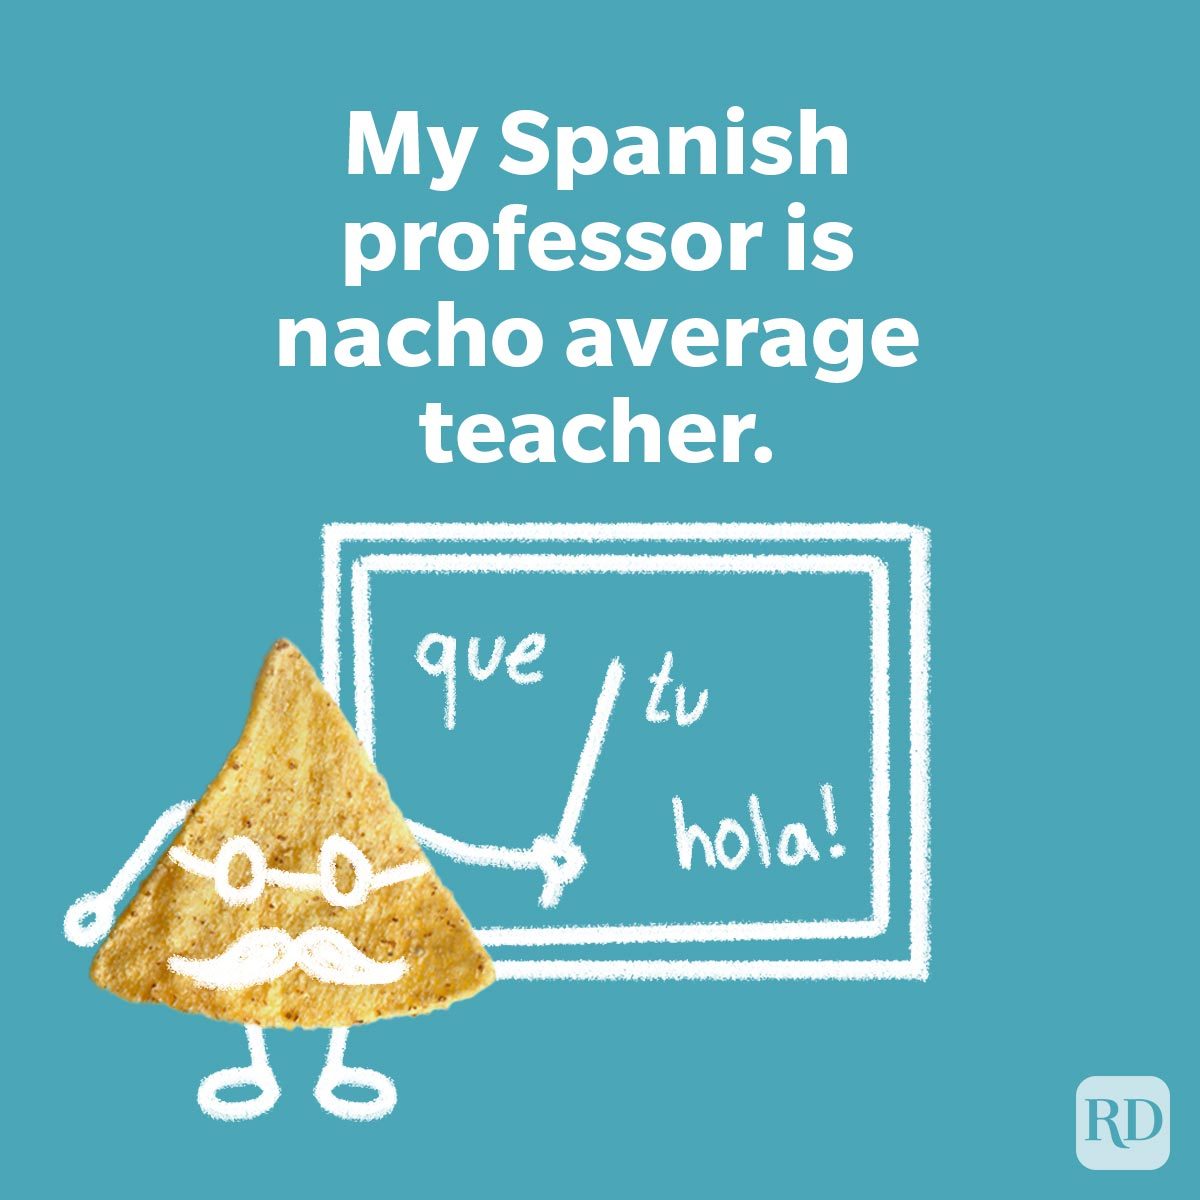 School Jokes That Won't Land You In Detention nacho as a teacher teaching Spanish on a chalk board on turquoise background